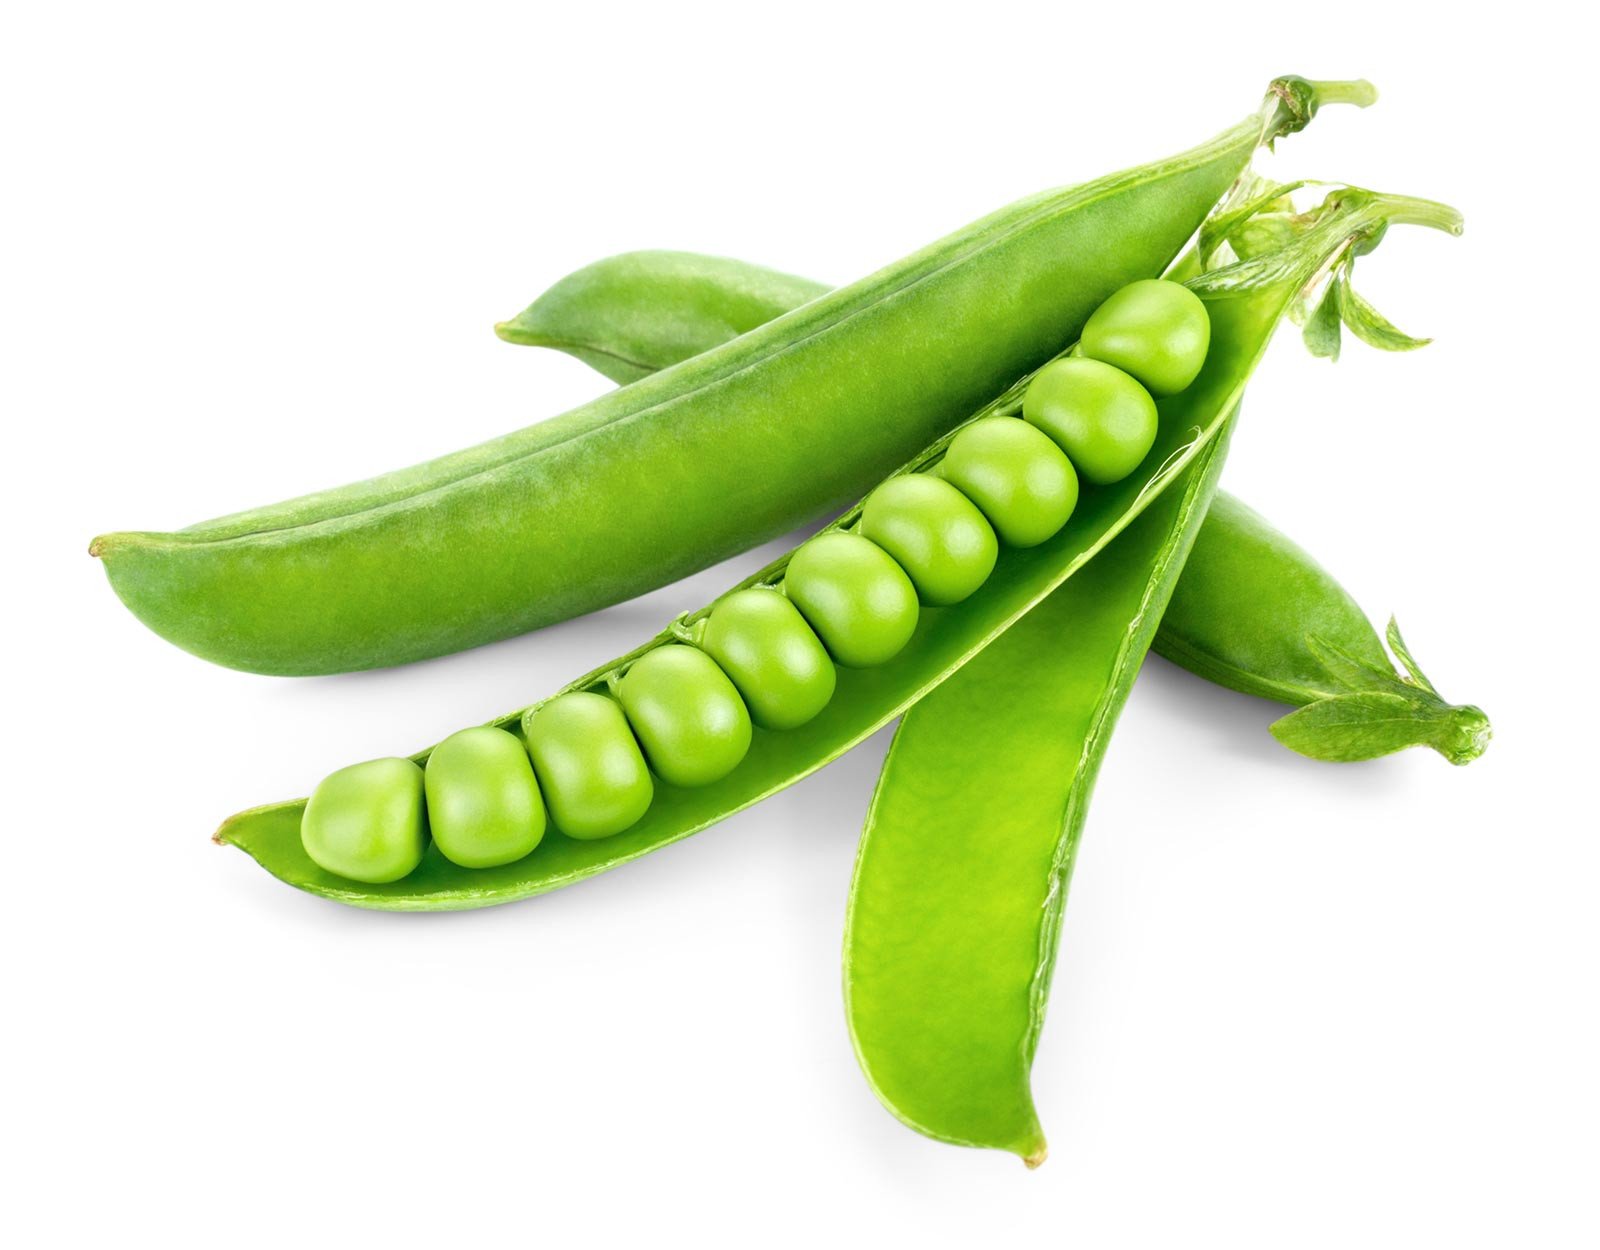 why do fresh peas boil over in the microwave but not canned peas